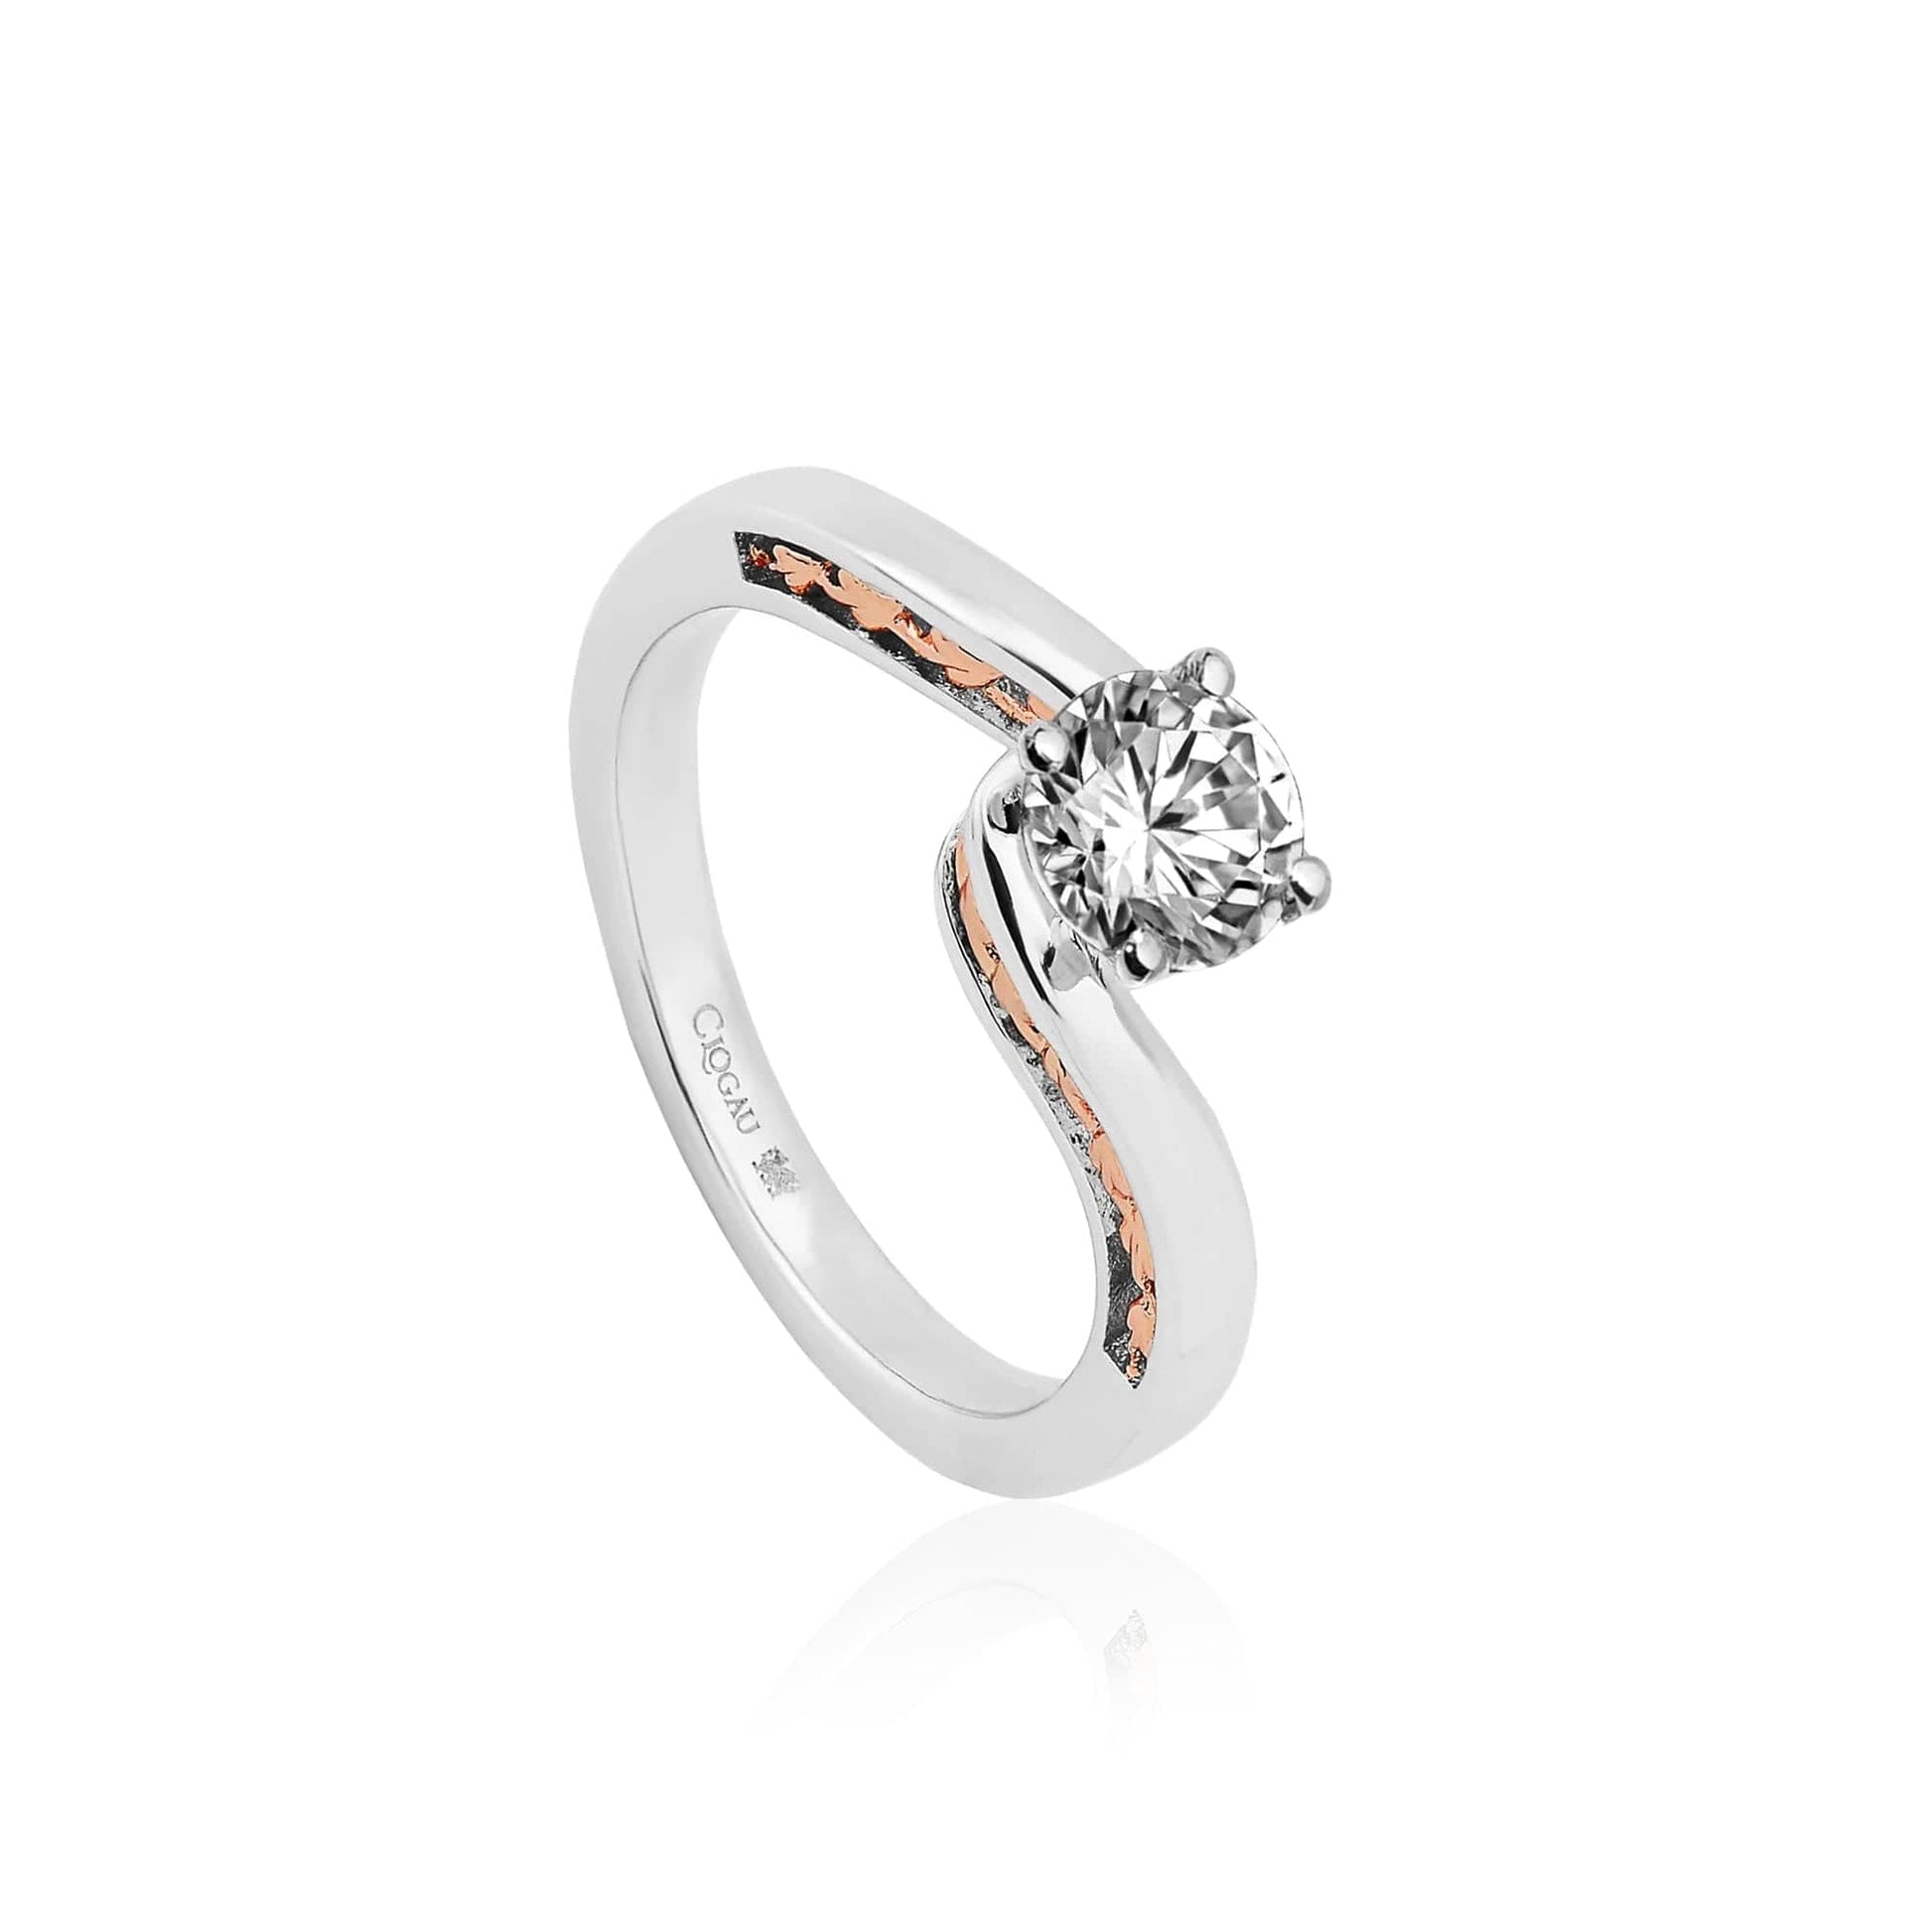 18ct White Gold Forever Fairy-Tale Engagement Ring with 0.7ct Round Brilliant Cut Diamond